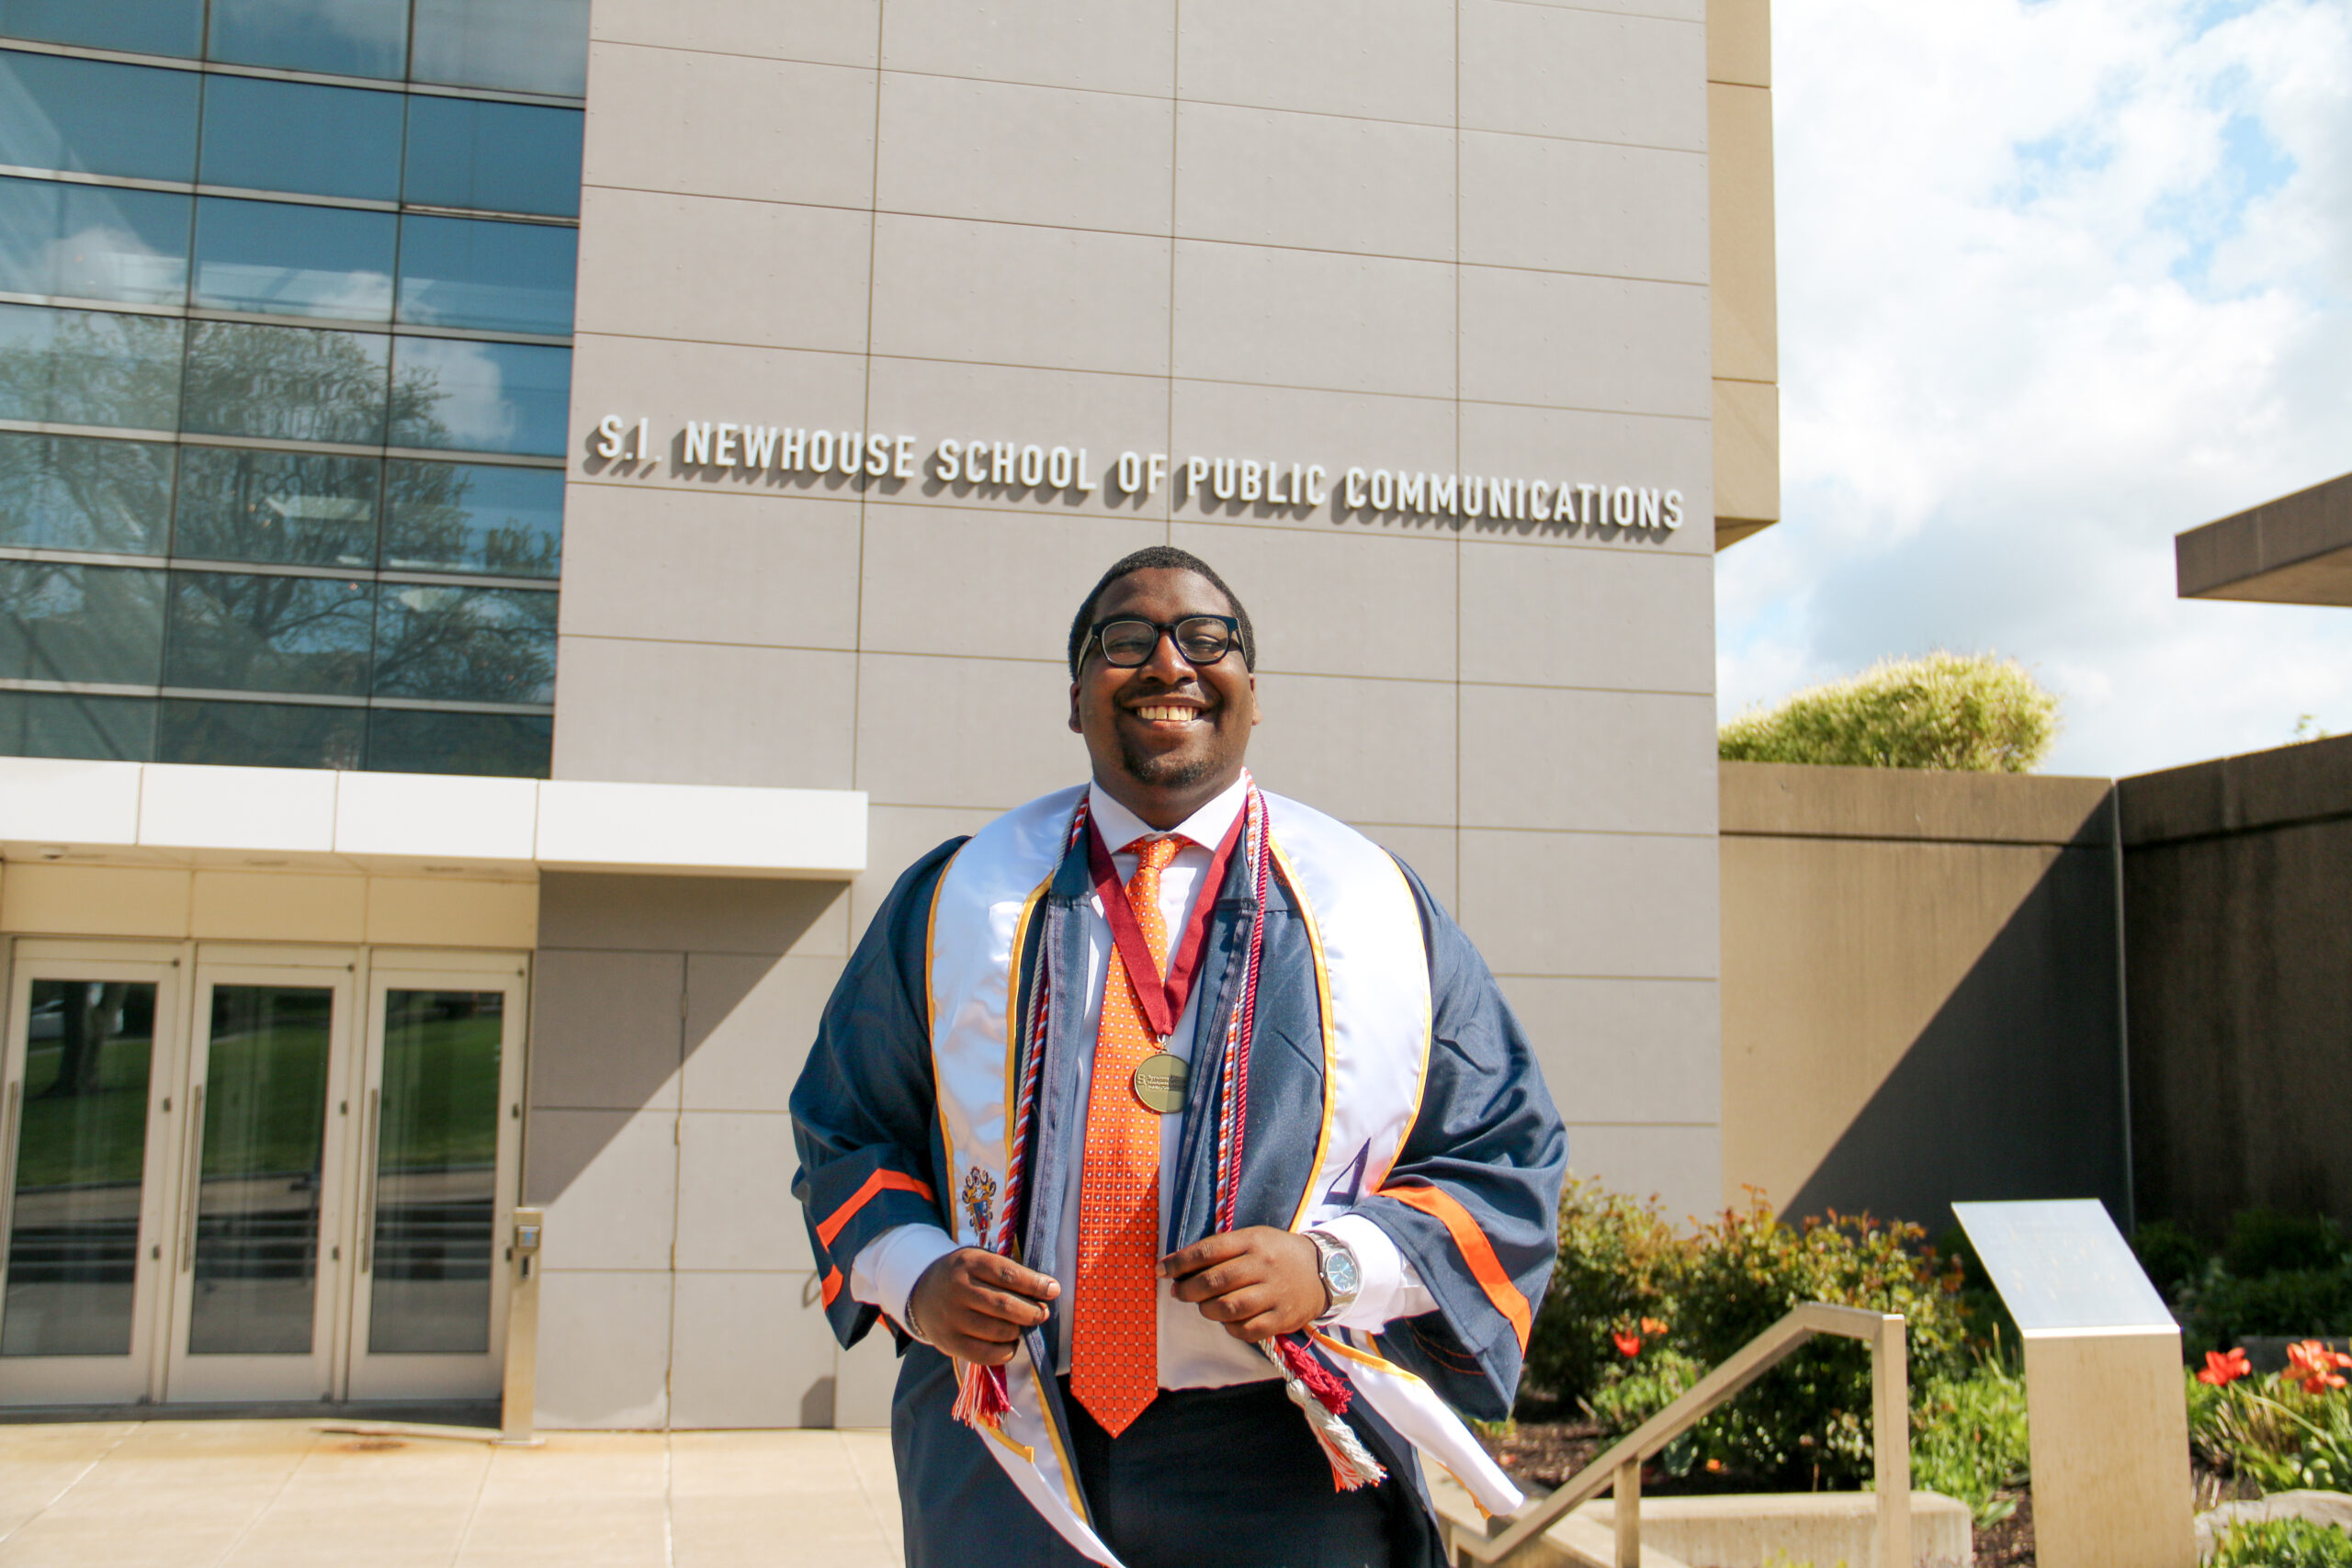 a person in a graduation gown stands outside and smiles